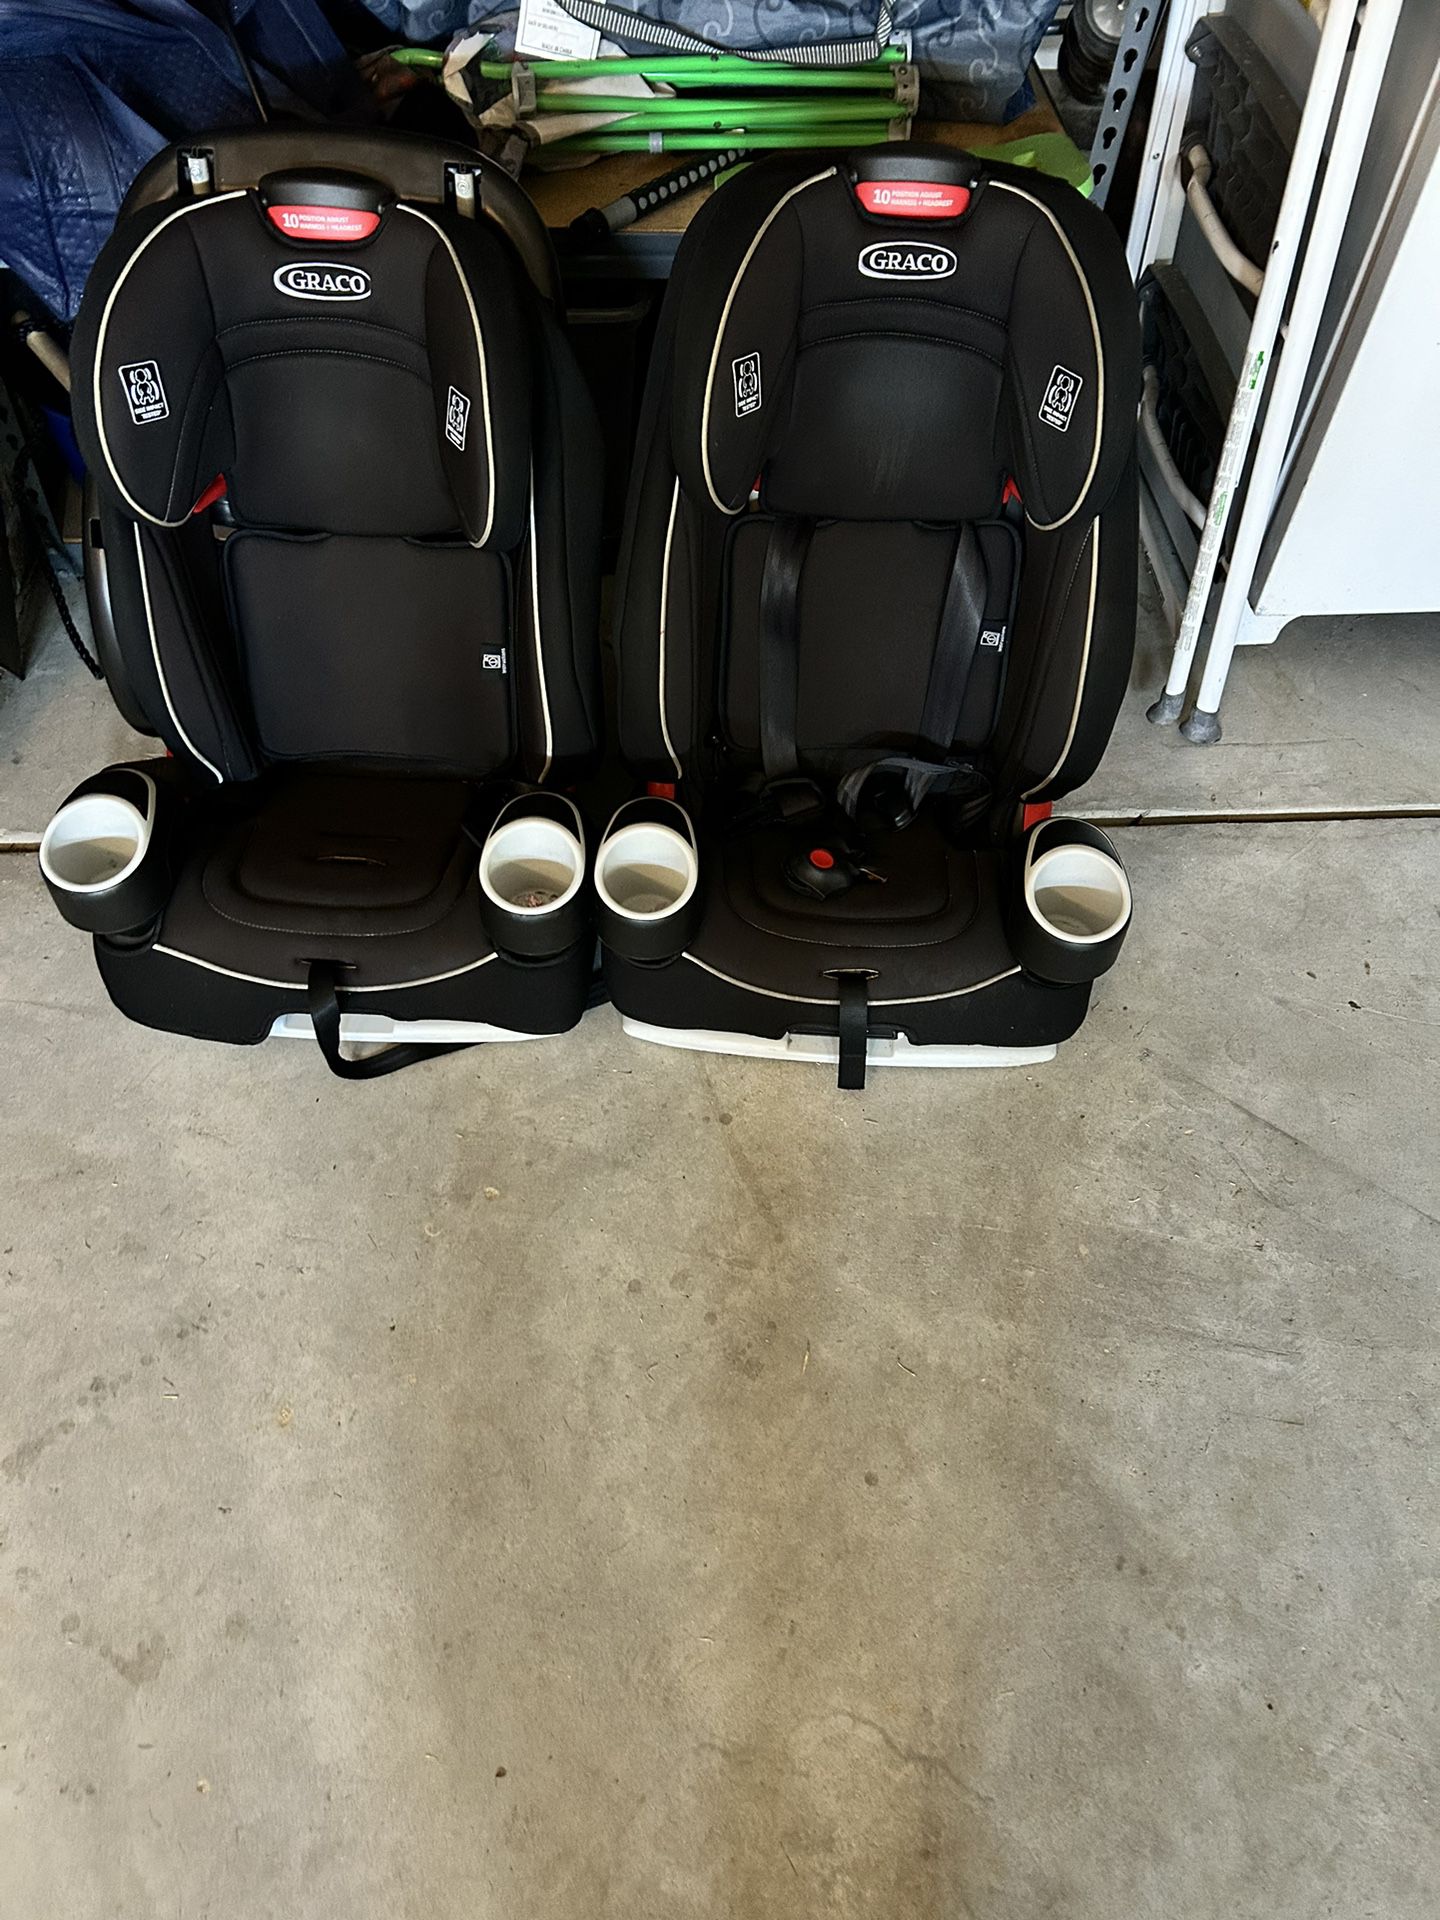 One Graco Car Seat 30.00 (not 2)